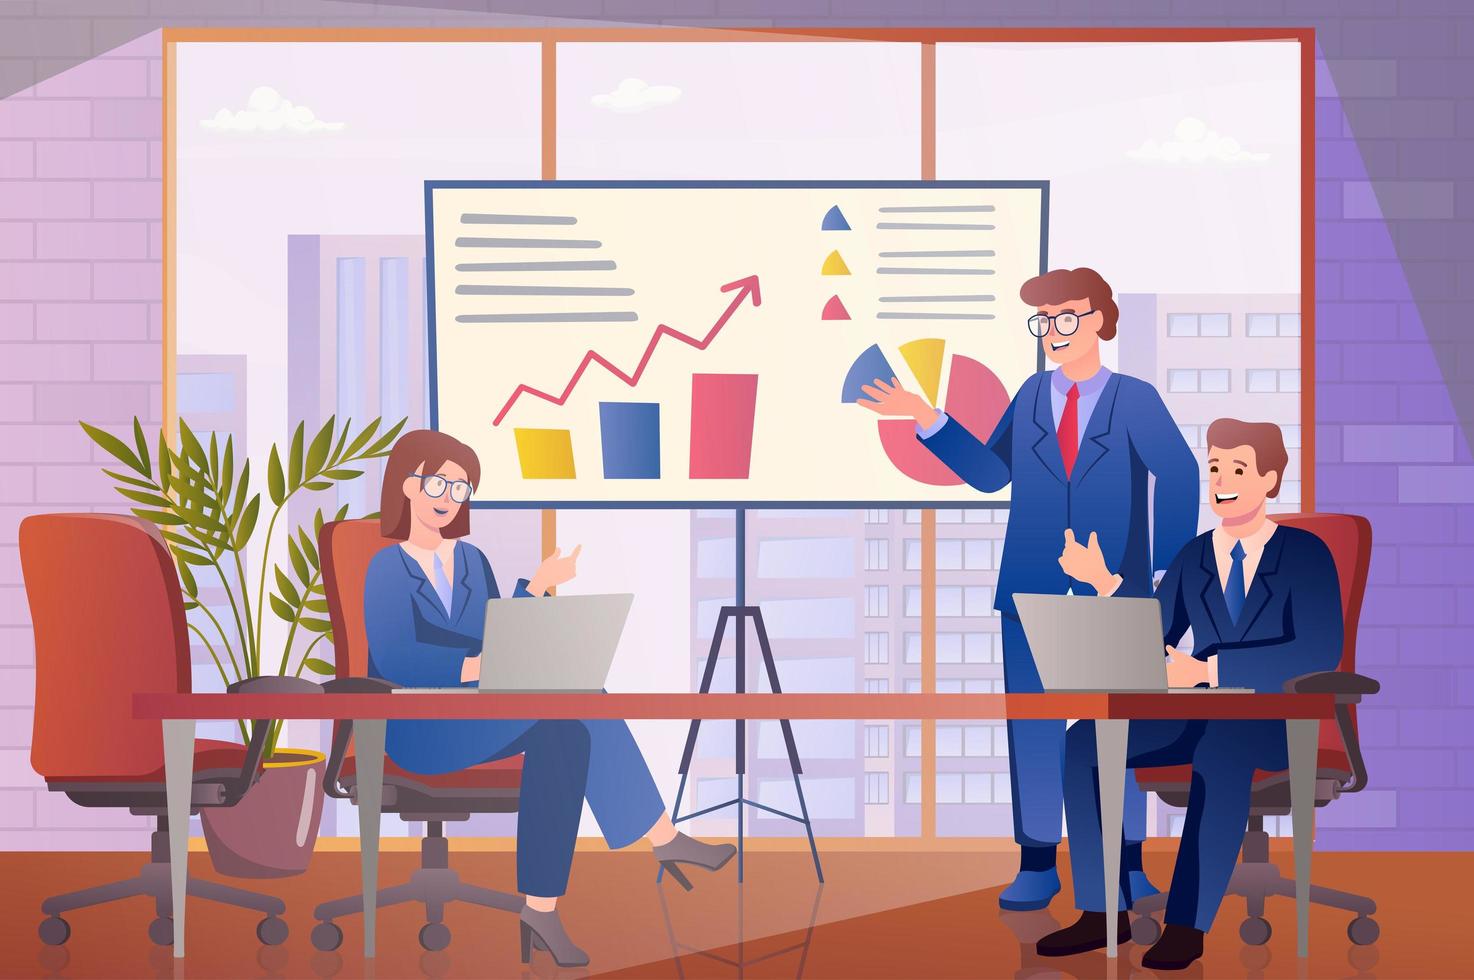 Meeting room concept in flat cartoon design. Employees discuss work tasks while sitting at table, analyze data on large board. Business communication. Vector illustration with people scene background